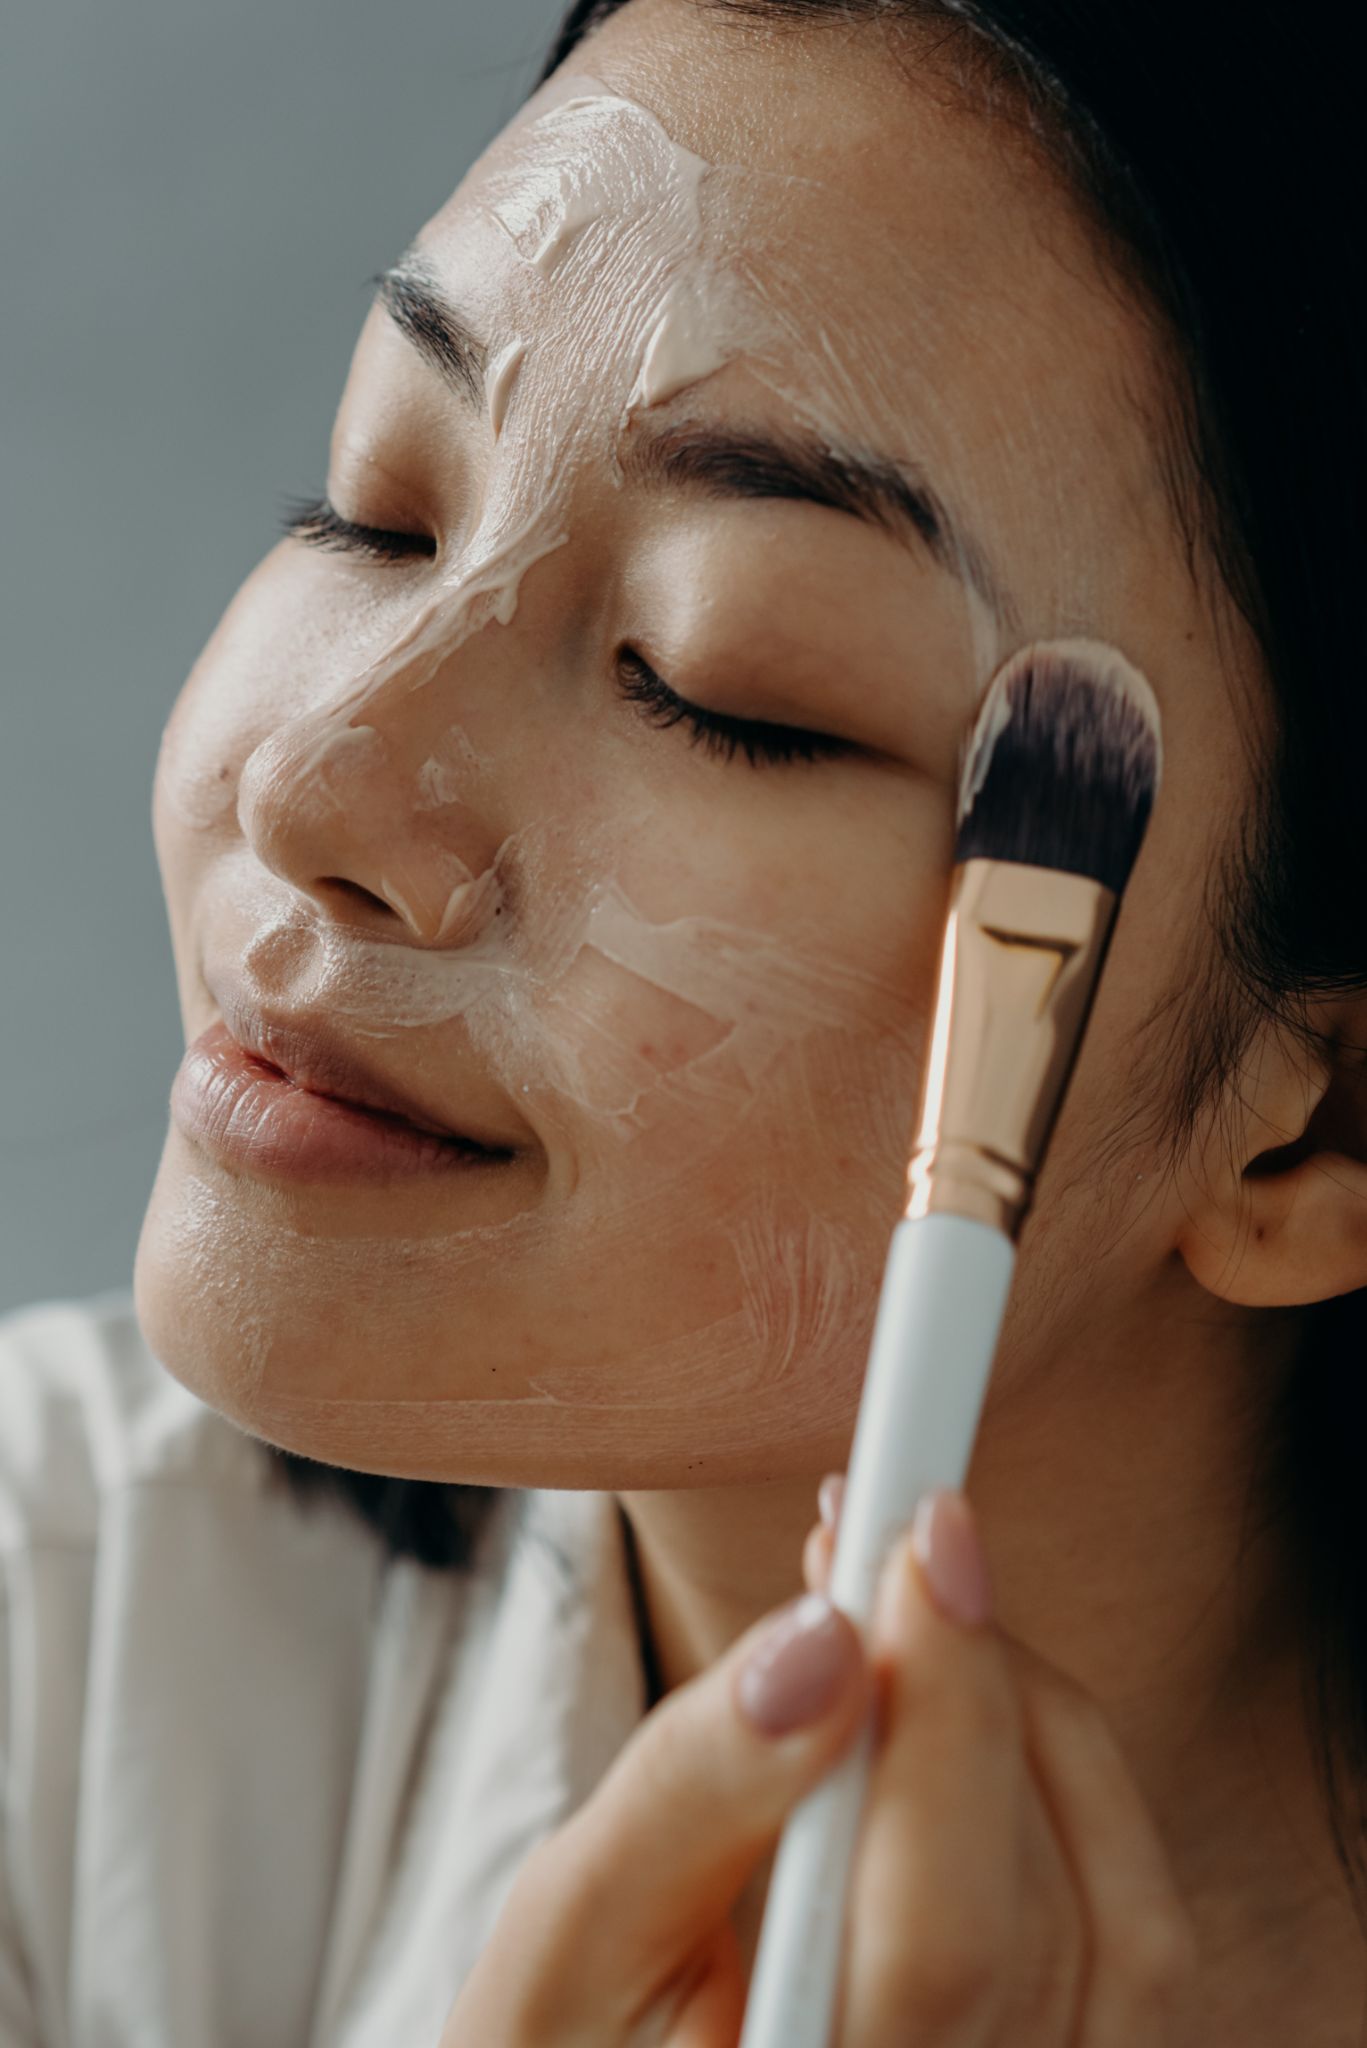 Is Exfoliation Part of Your Skincare Routine?